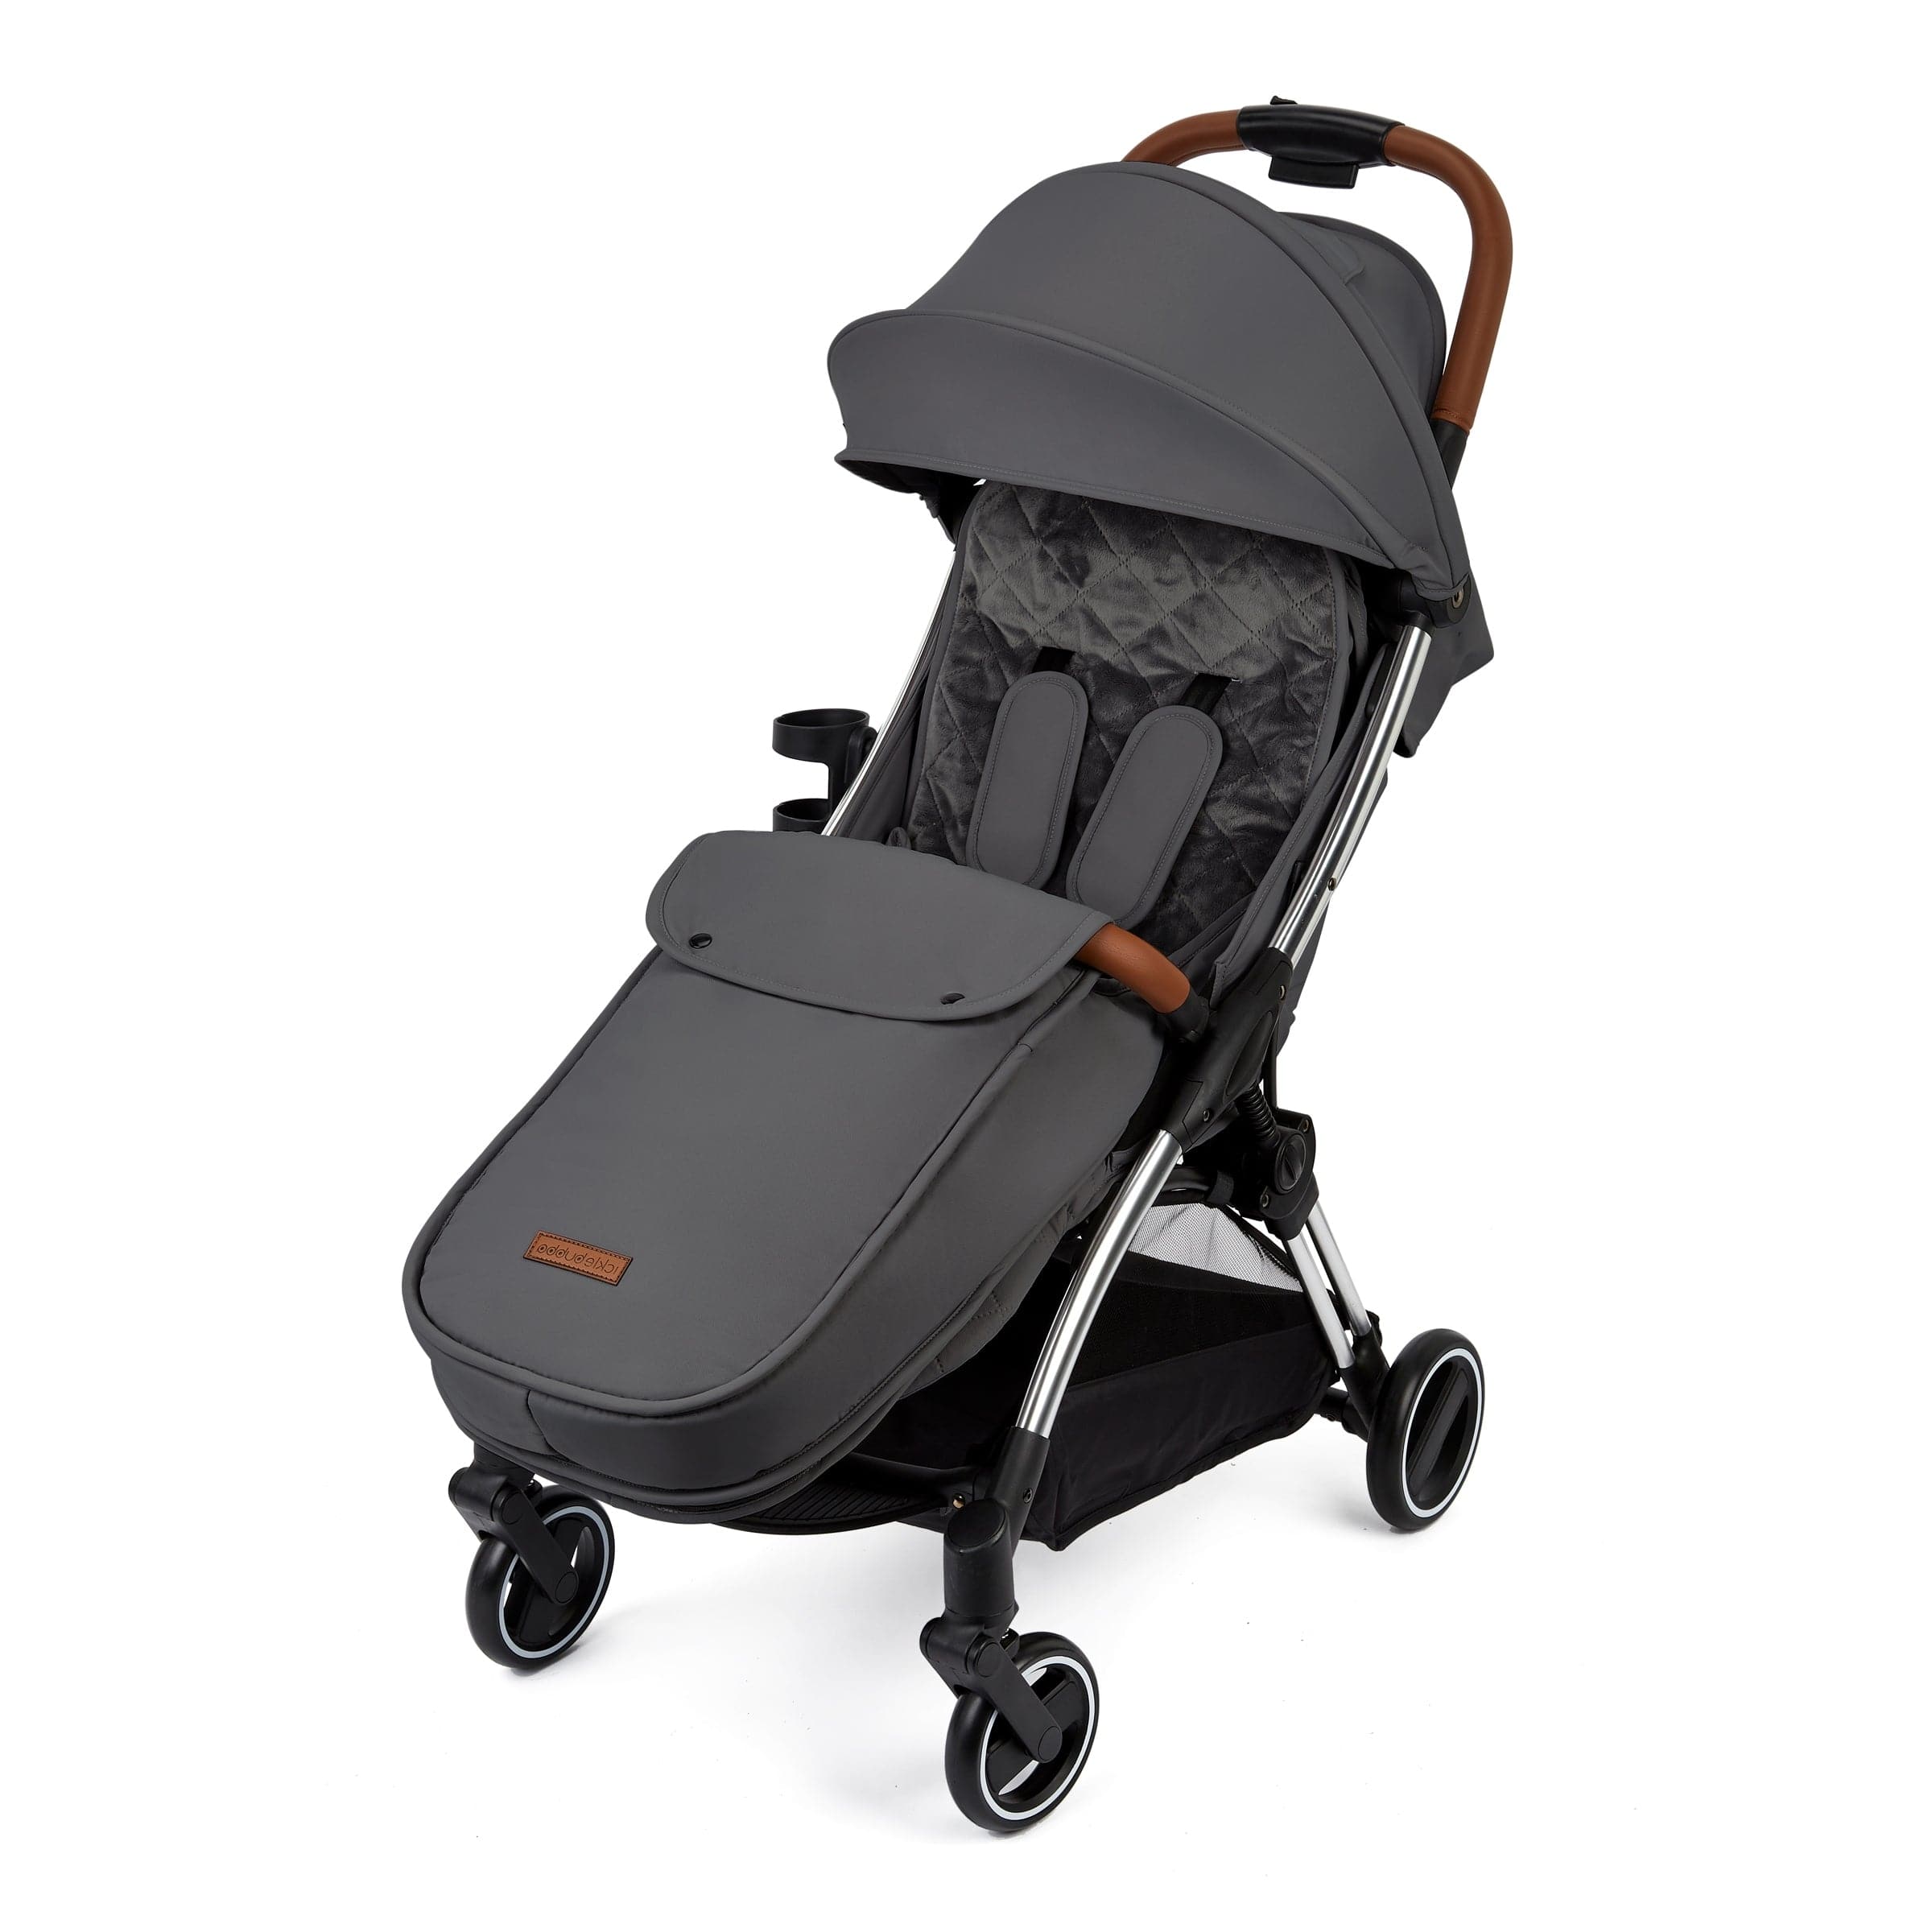 Ickle Bubba Gravity Max Pushchair - Graphite Grey - For Your Little One